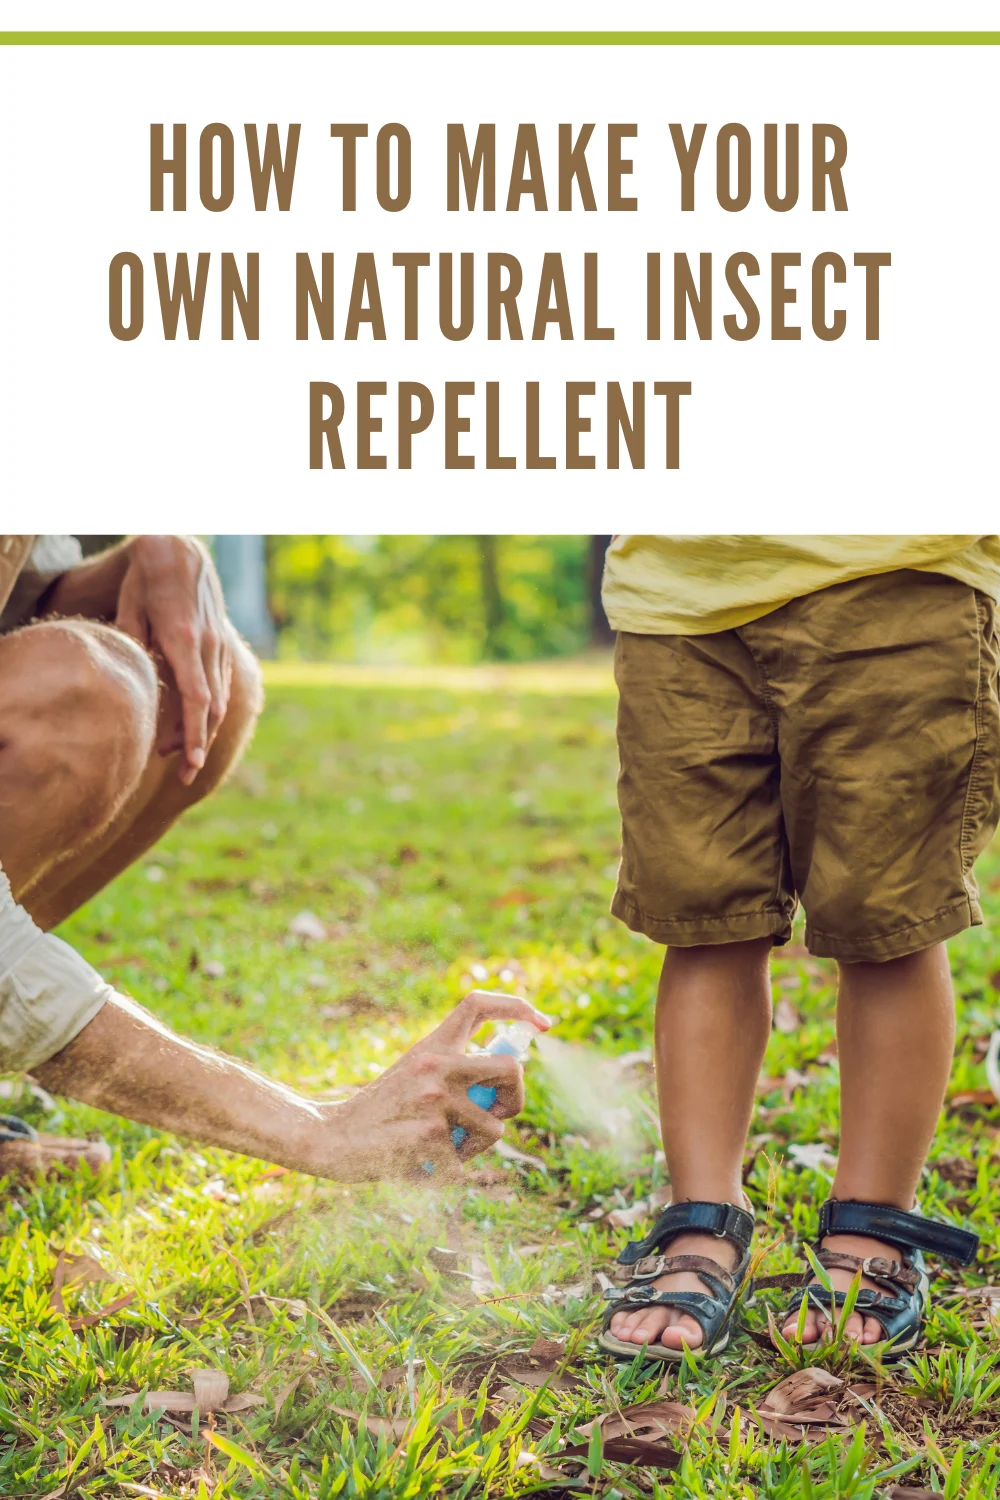 dad spraying son's legs with natural insect repellent